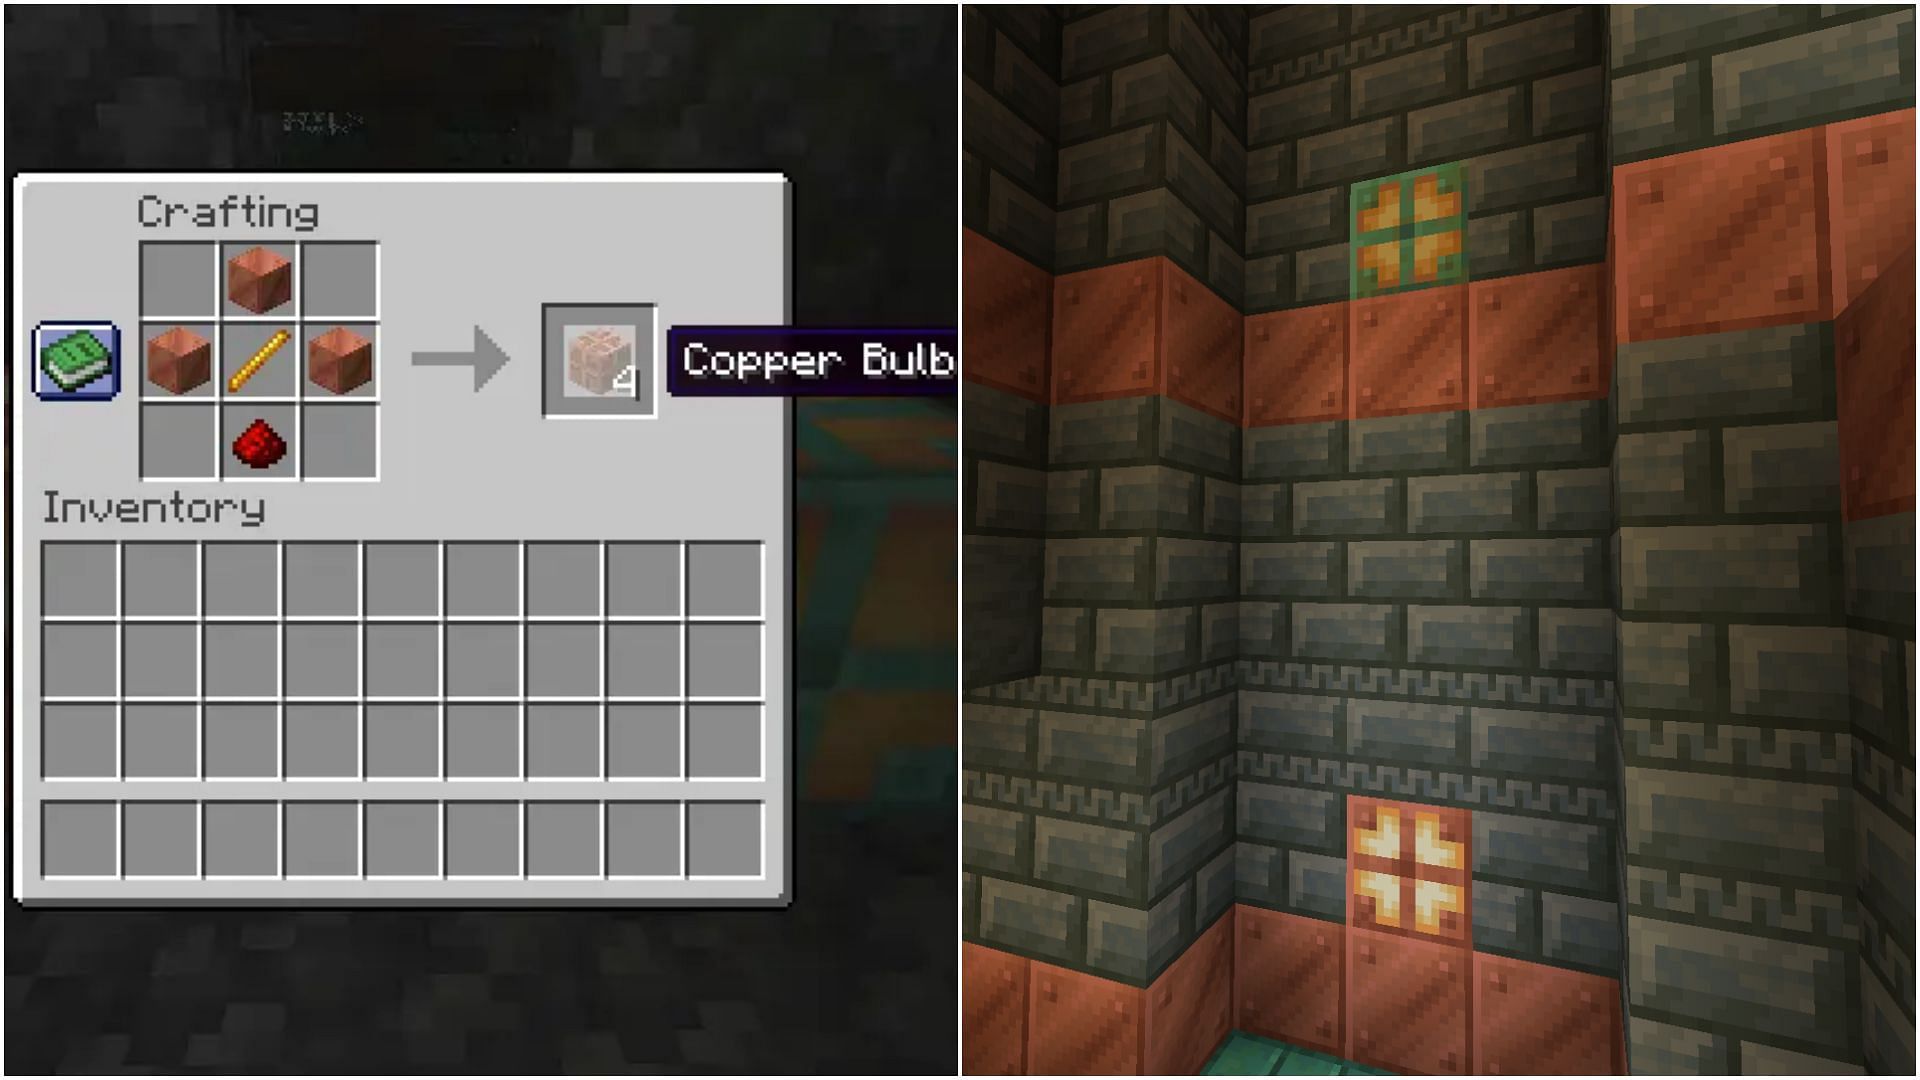 Either craft or find a new copper bulb (Image via Mojang Studios)